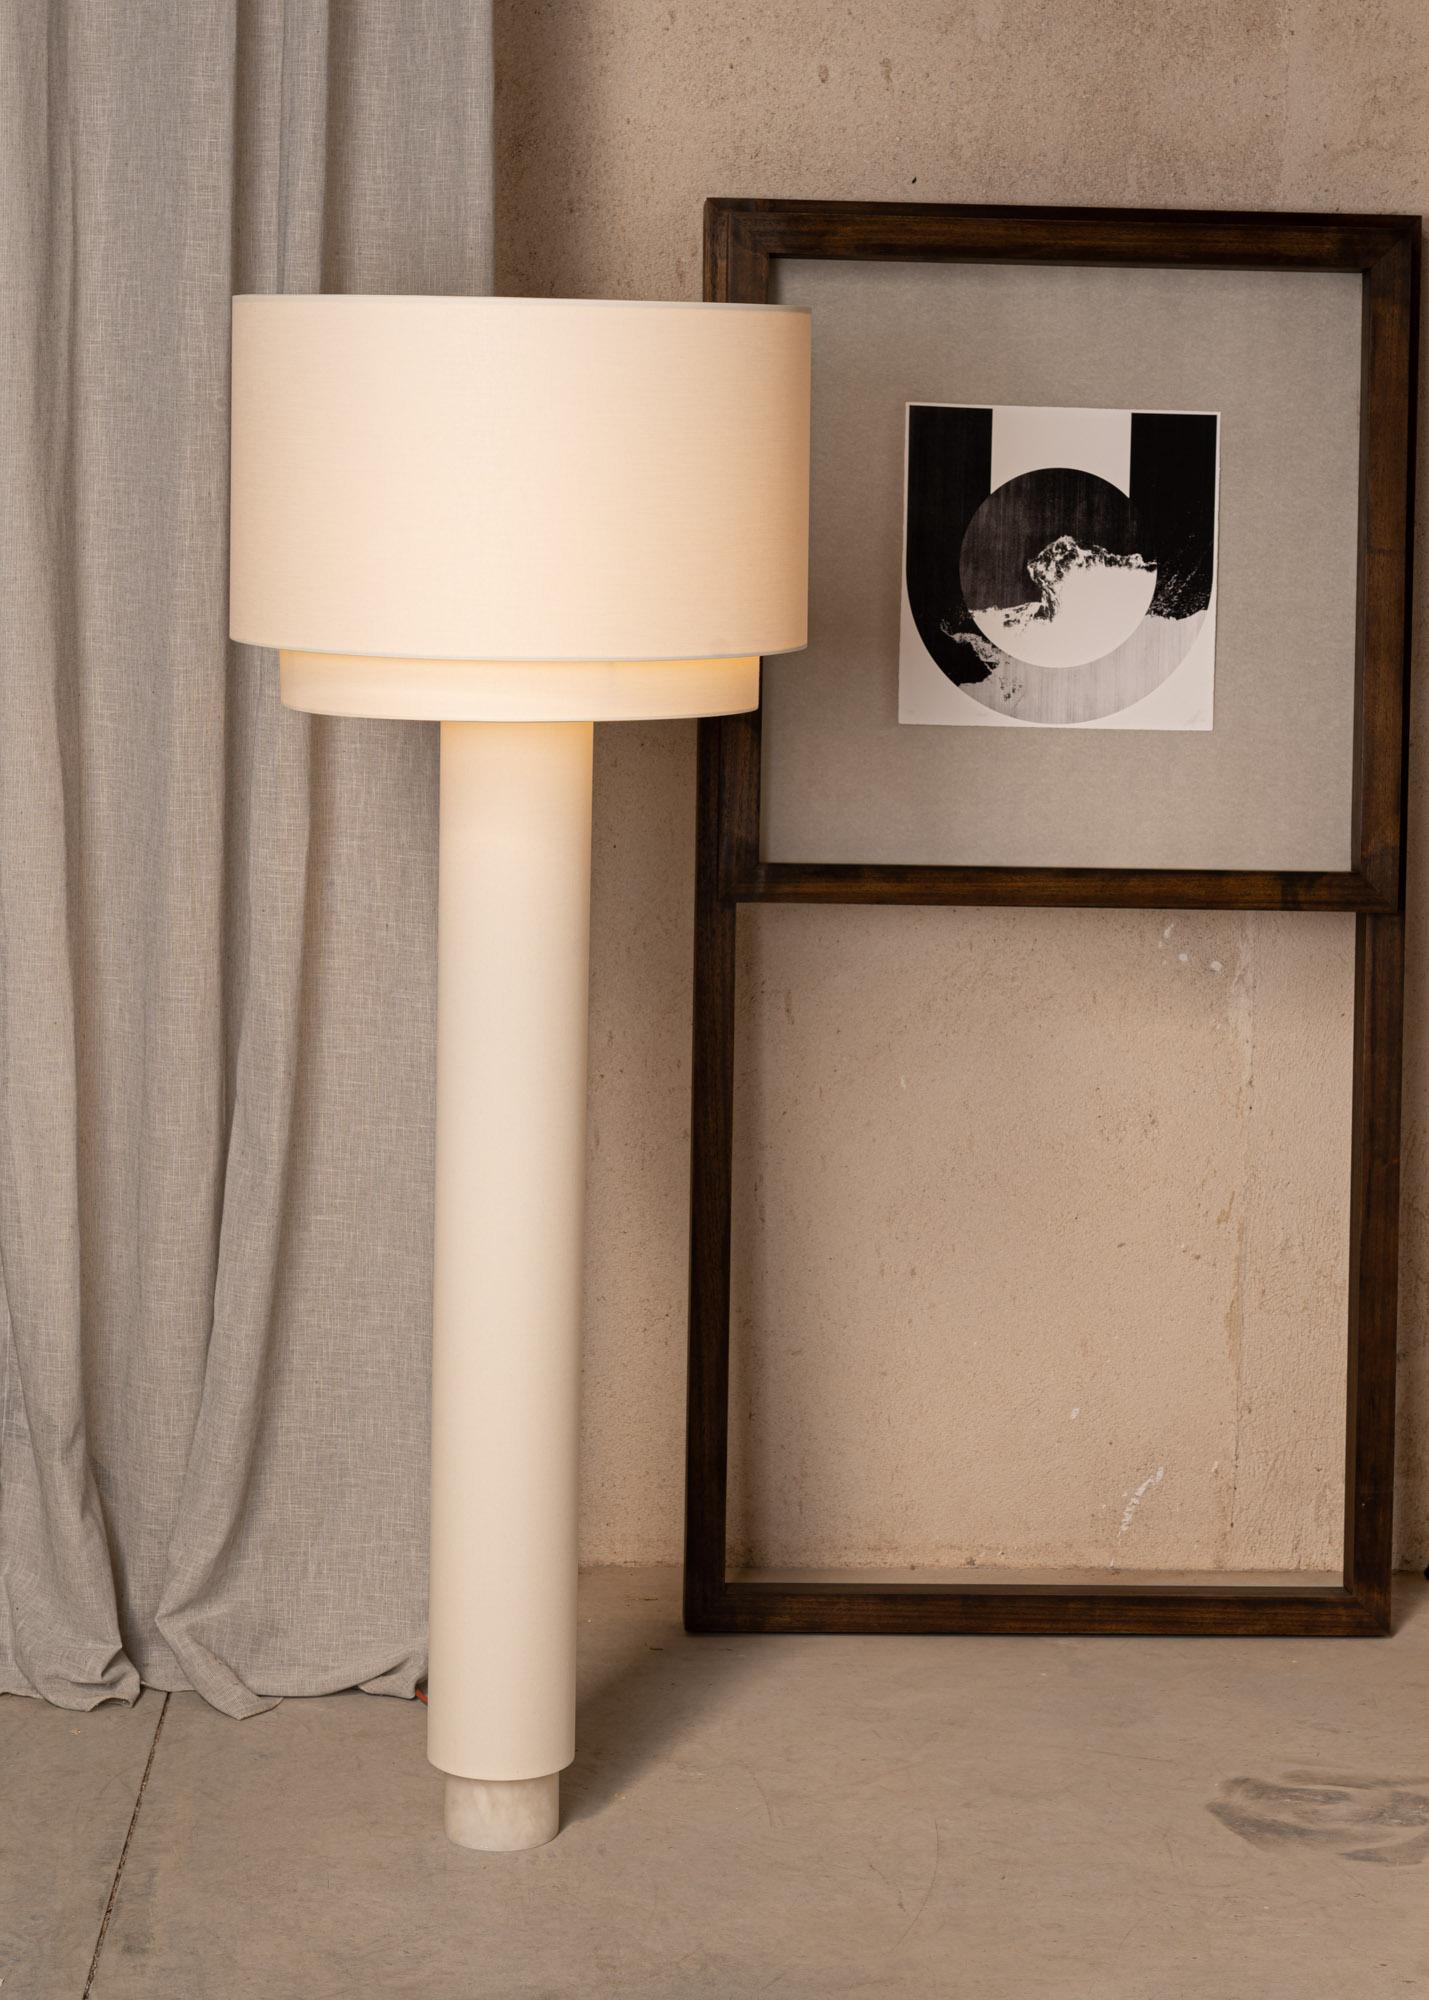 Kolumno White Alabaster Floor Lamp by Simone & Marcel
Dimensions: D 60 x W 60 x H 176 cm.
Materials: Brass, cotton and white alabaster.

Also available in different marble and alabaster options and finishes. Custom options available on request.